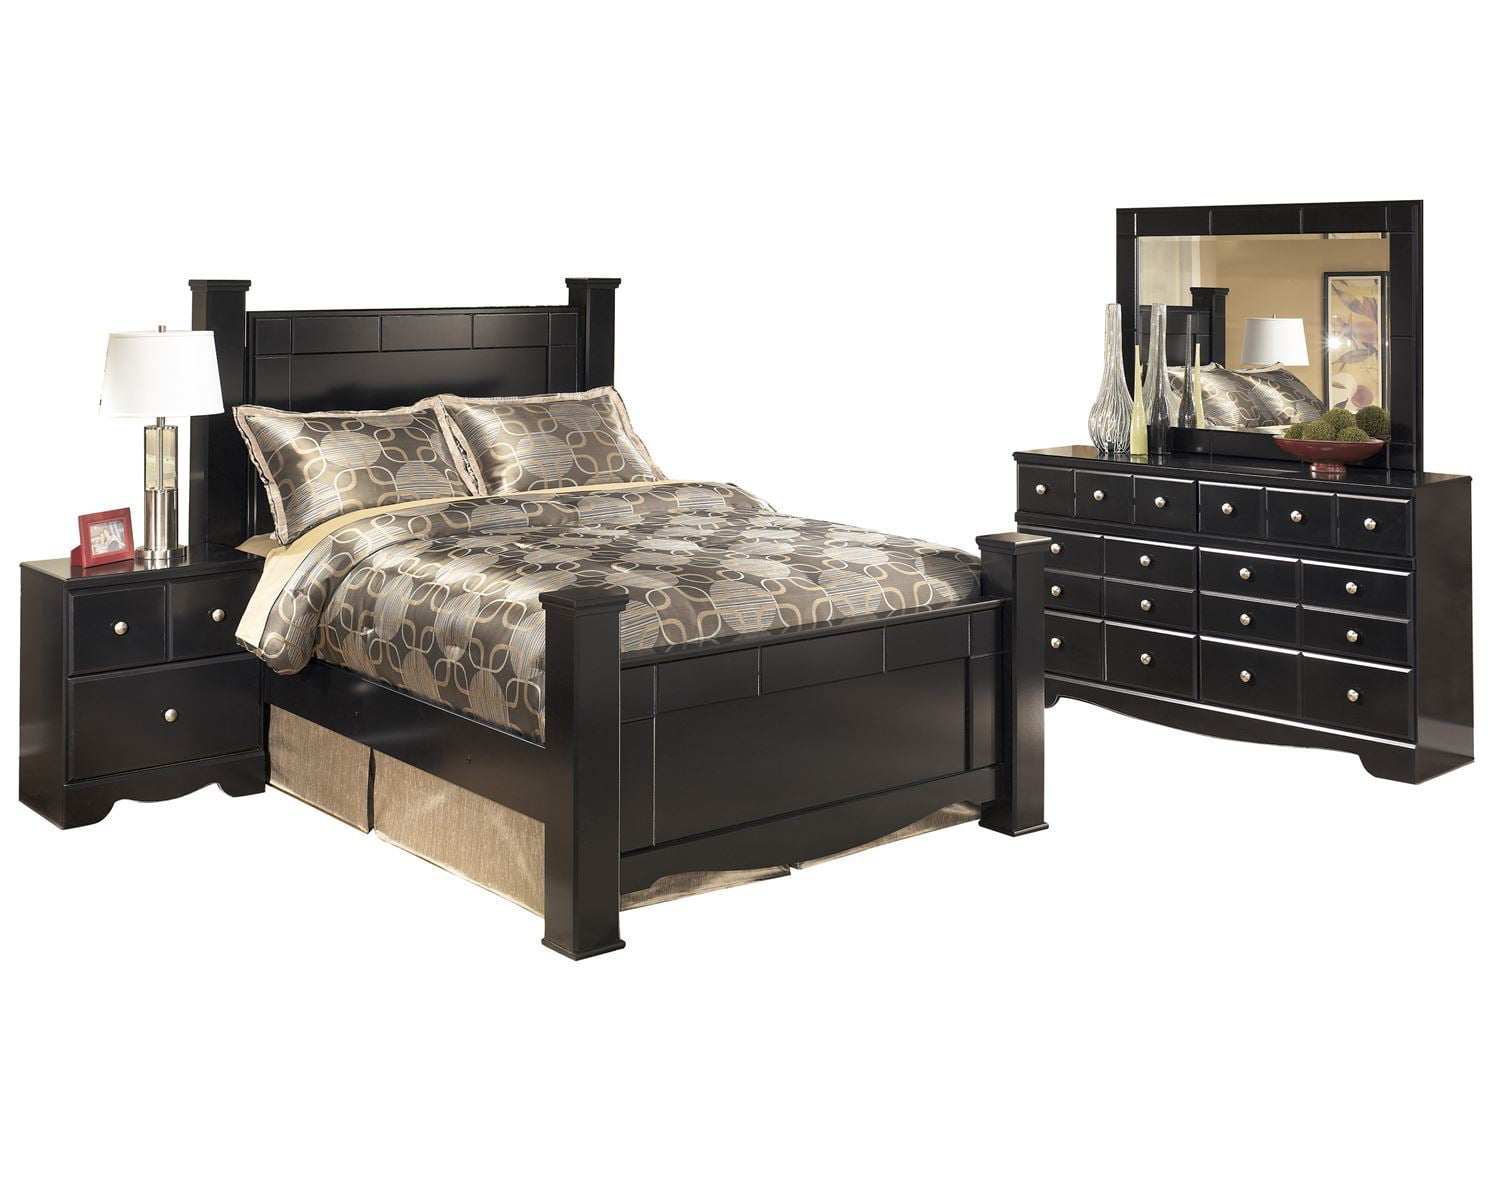 Ashley Furniture Shay 4 Pc Queen Poster Bedroom Set Black